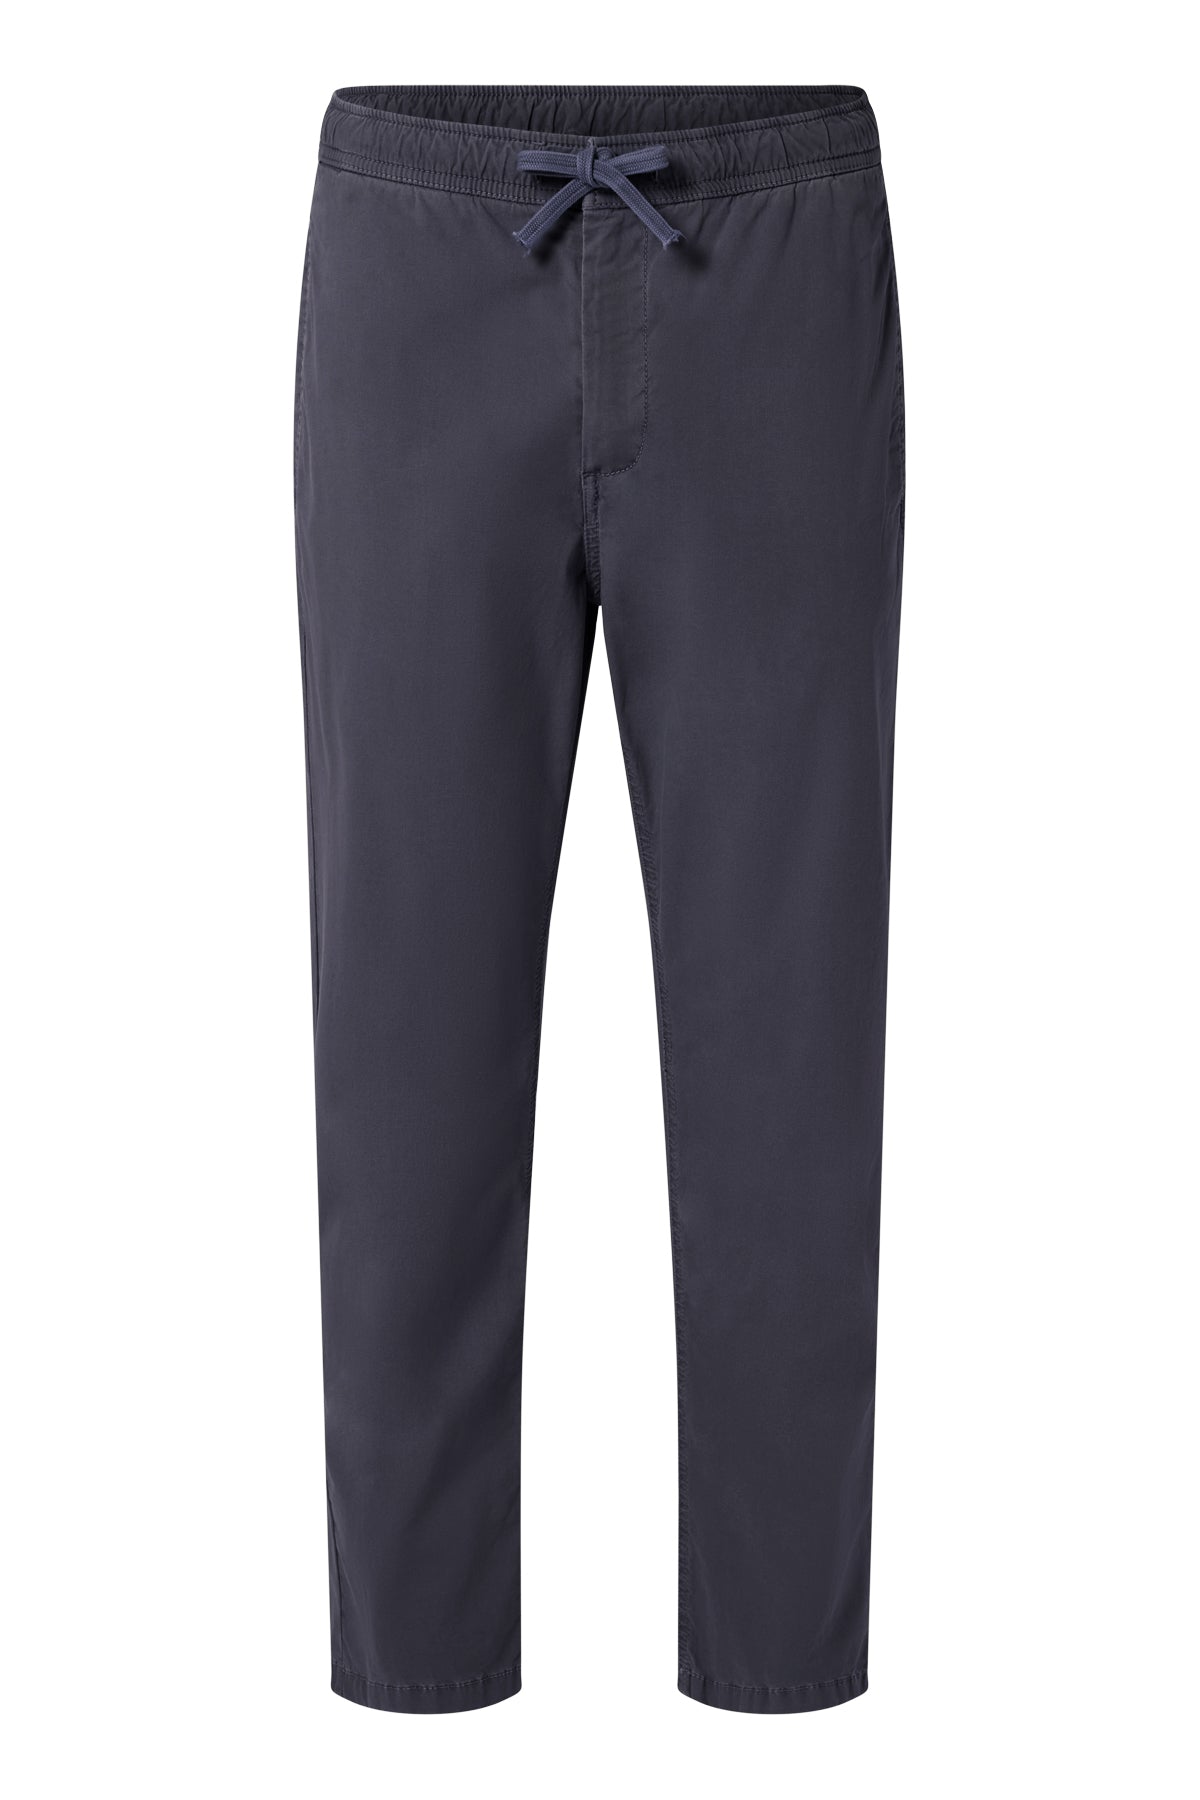 NAVY BLUE ETHICA TROUSERS